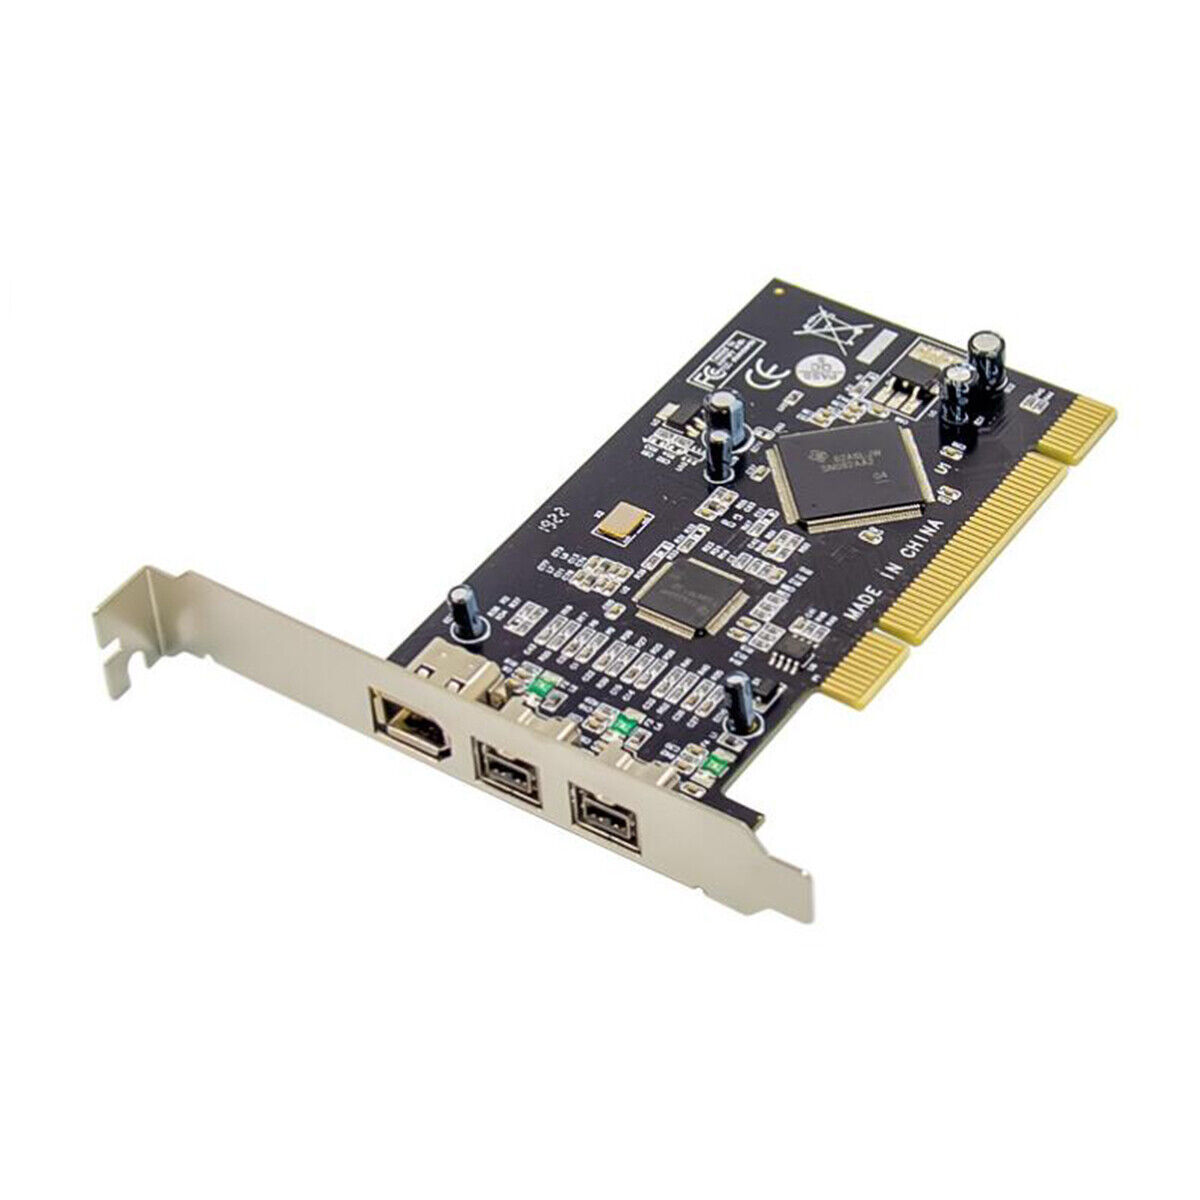 3Ports 2x1394B+1x1394A Firewire400/800 PCI 32bit Adapter Card TI Chip with Cable